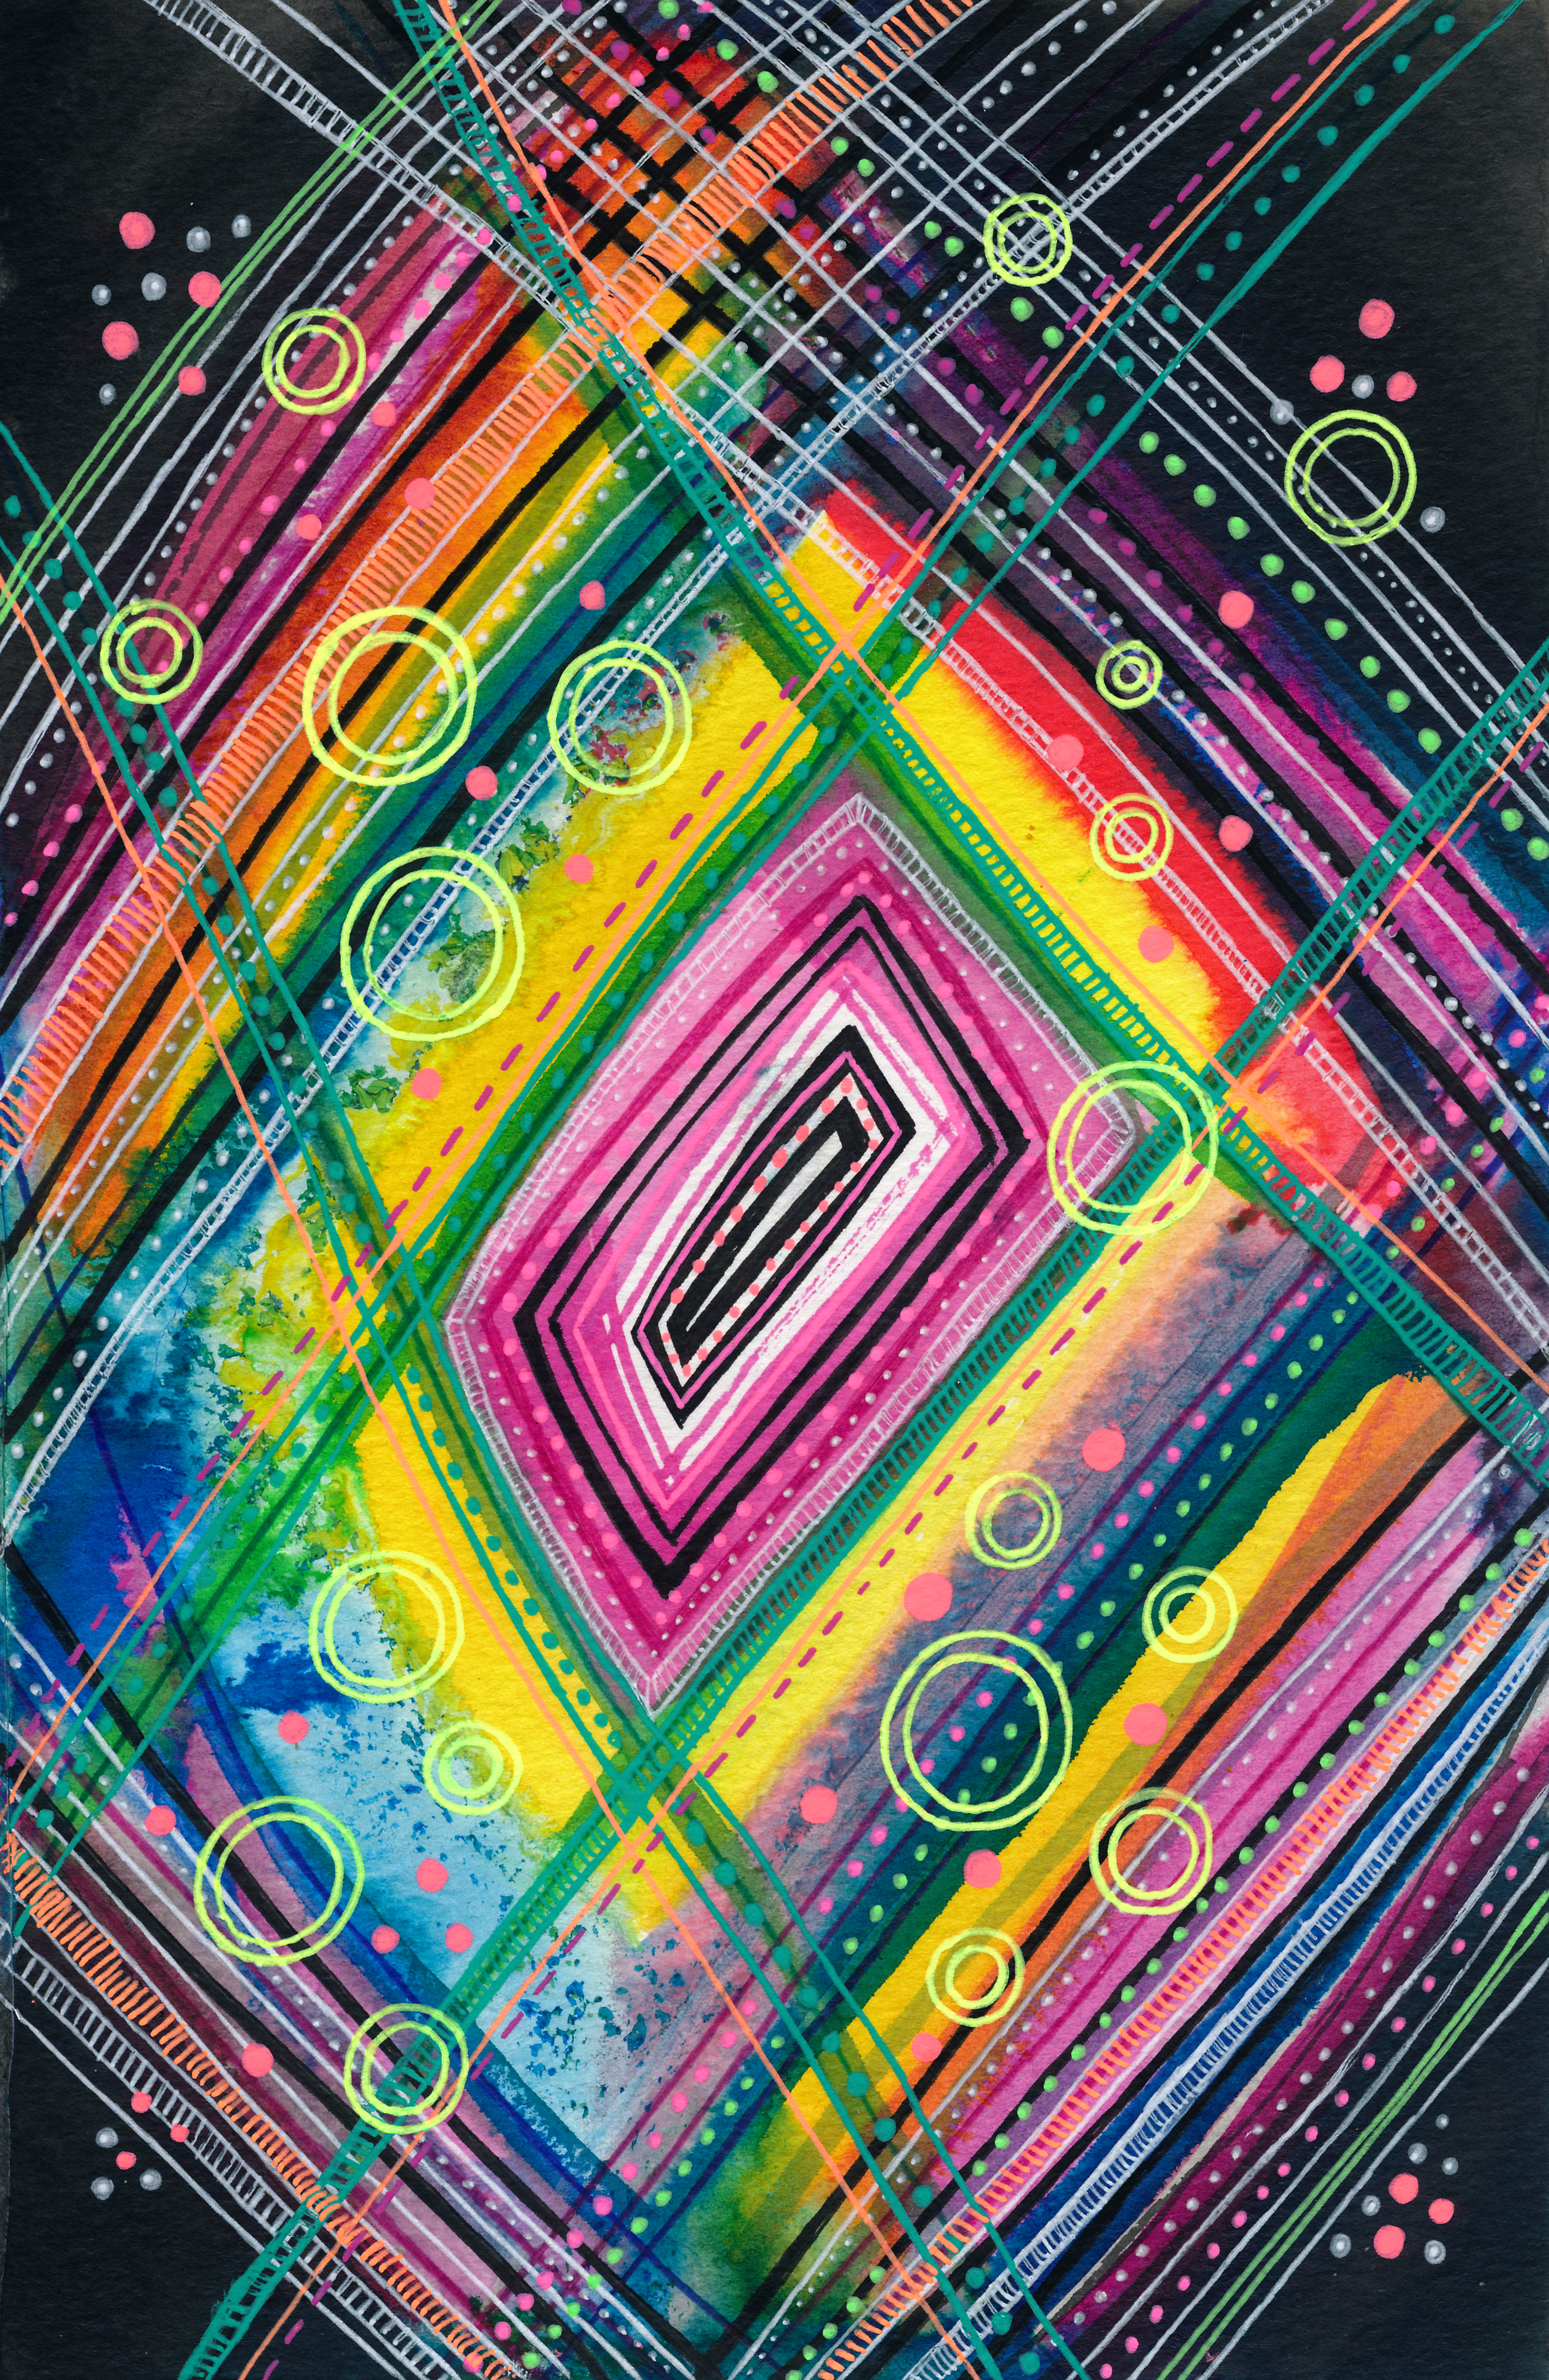 paints, multicolored, abstract, patterns, circles, motley, lines, watercolor Aesthetic wallpaper